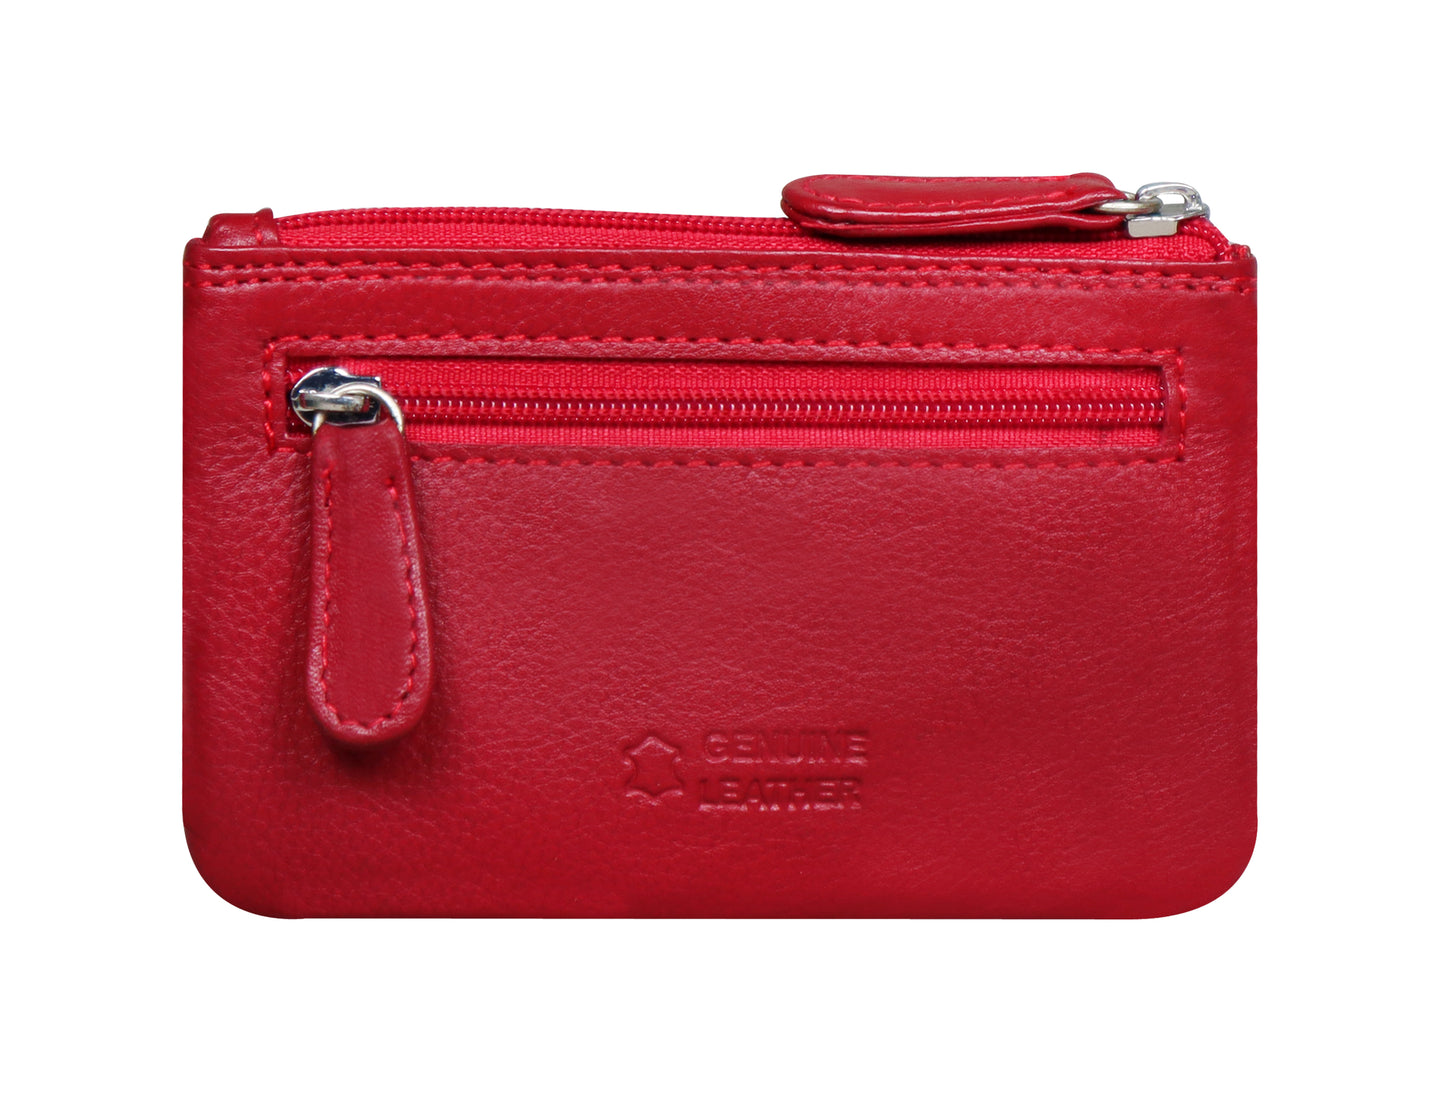 Calfnero Genuine Leather Women's Combo Pack (CCM-003-Red)